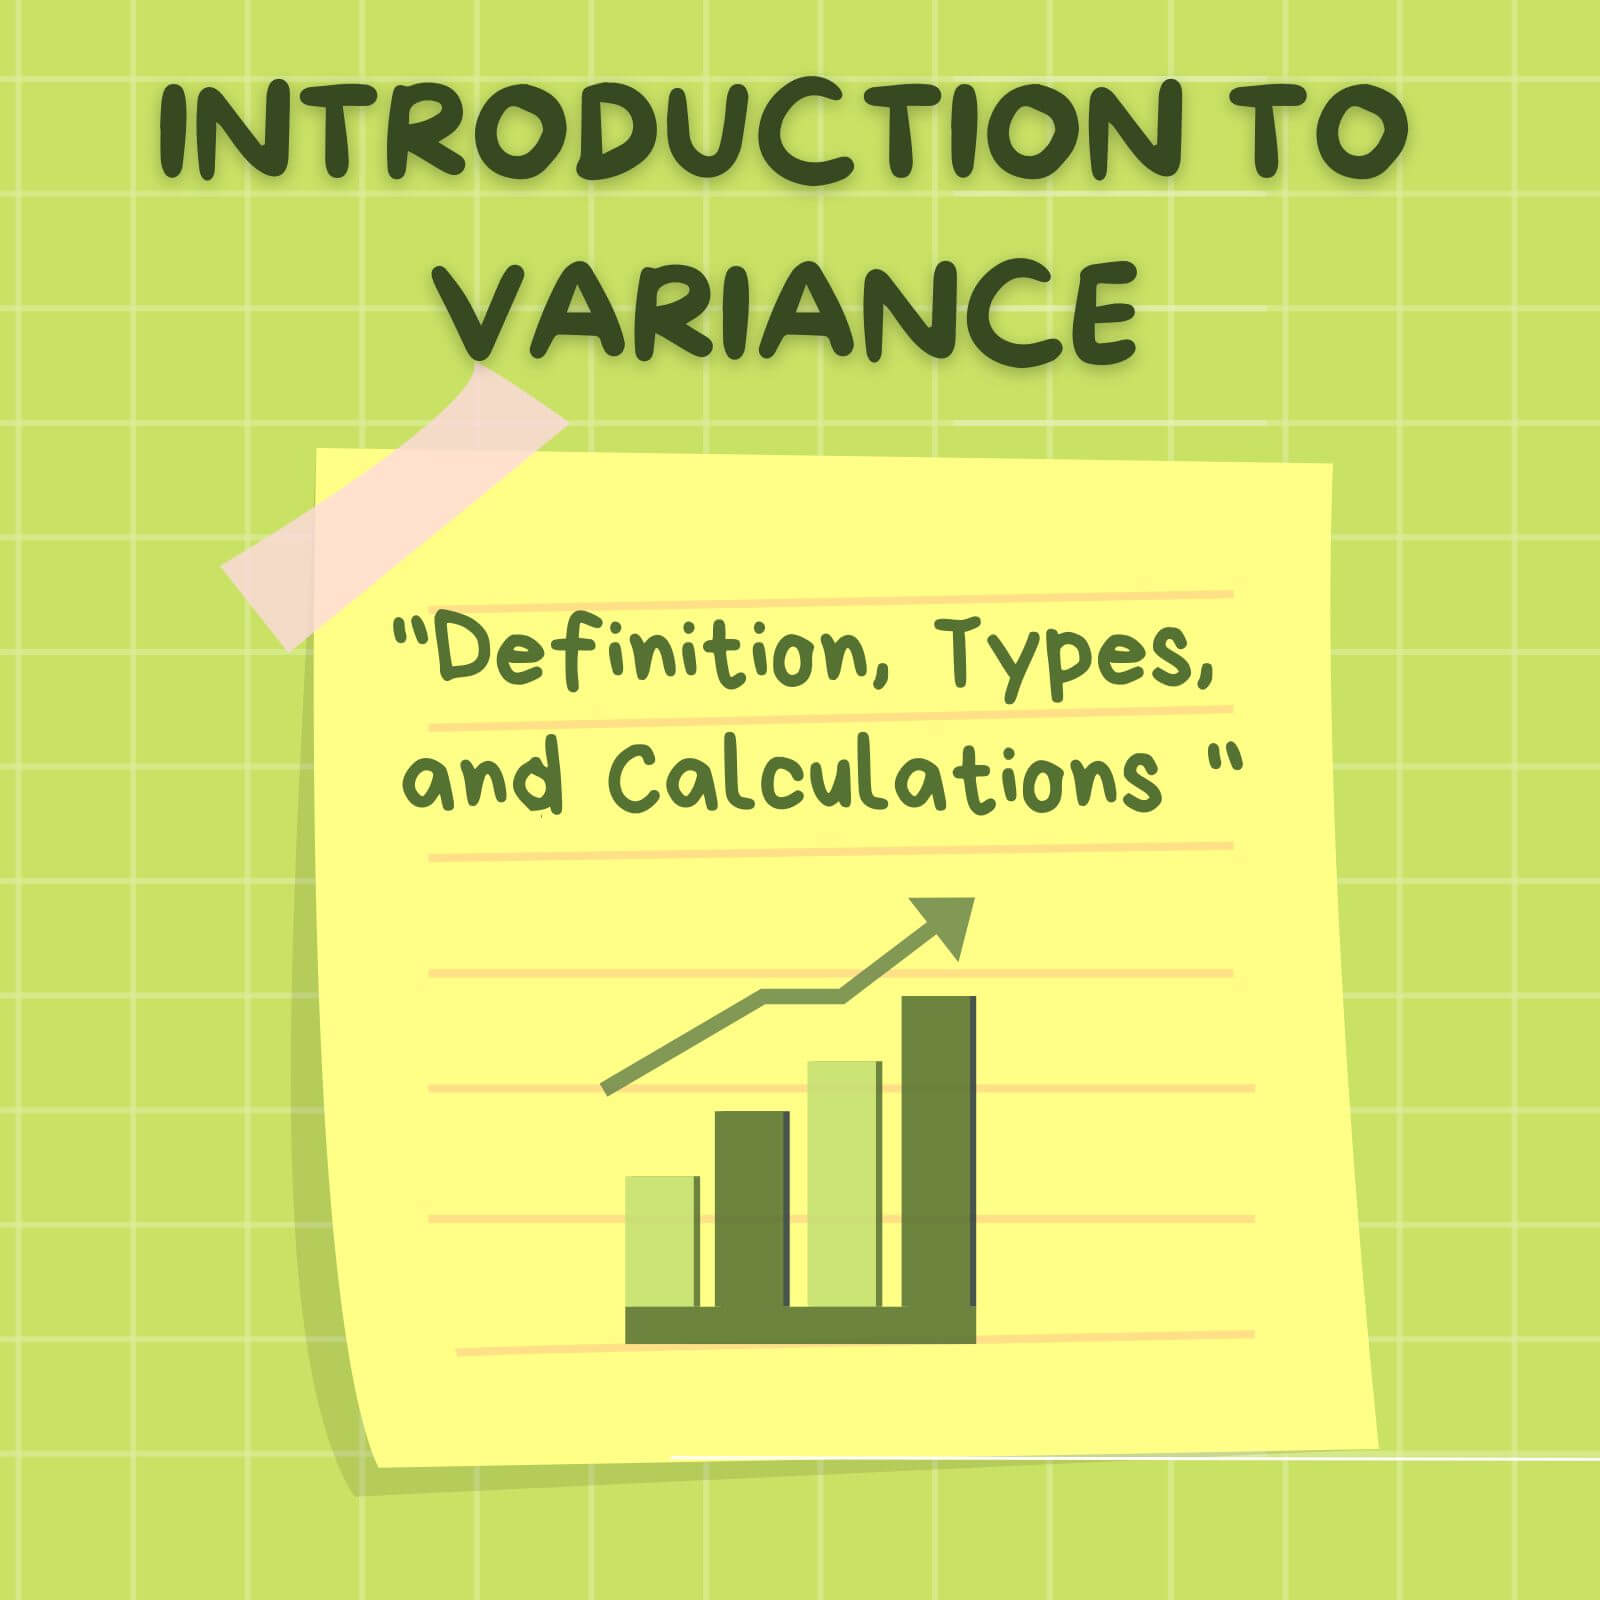 research variance meaning